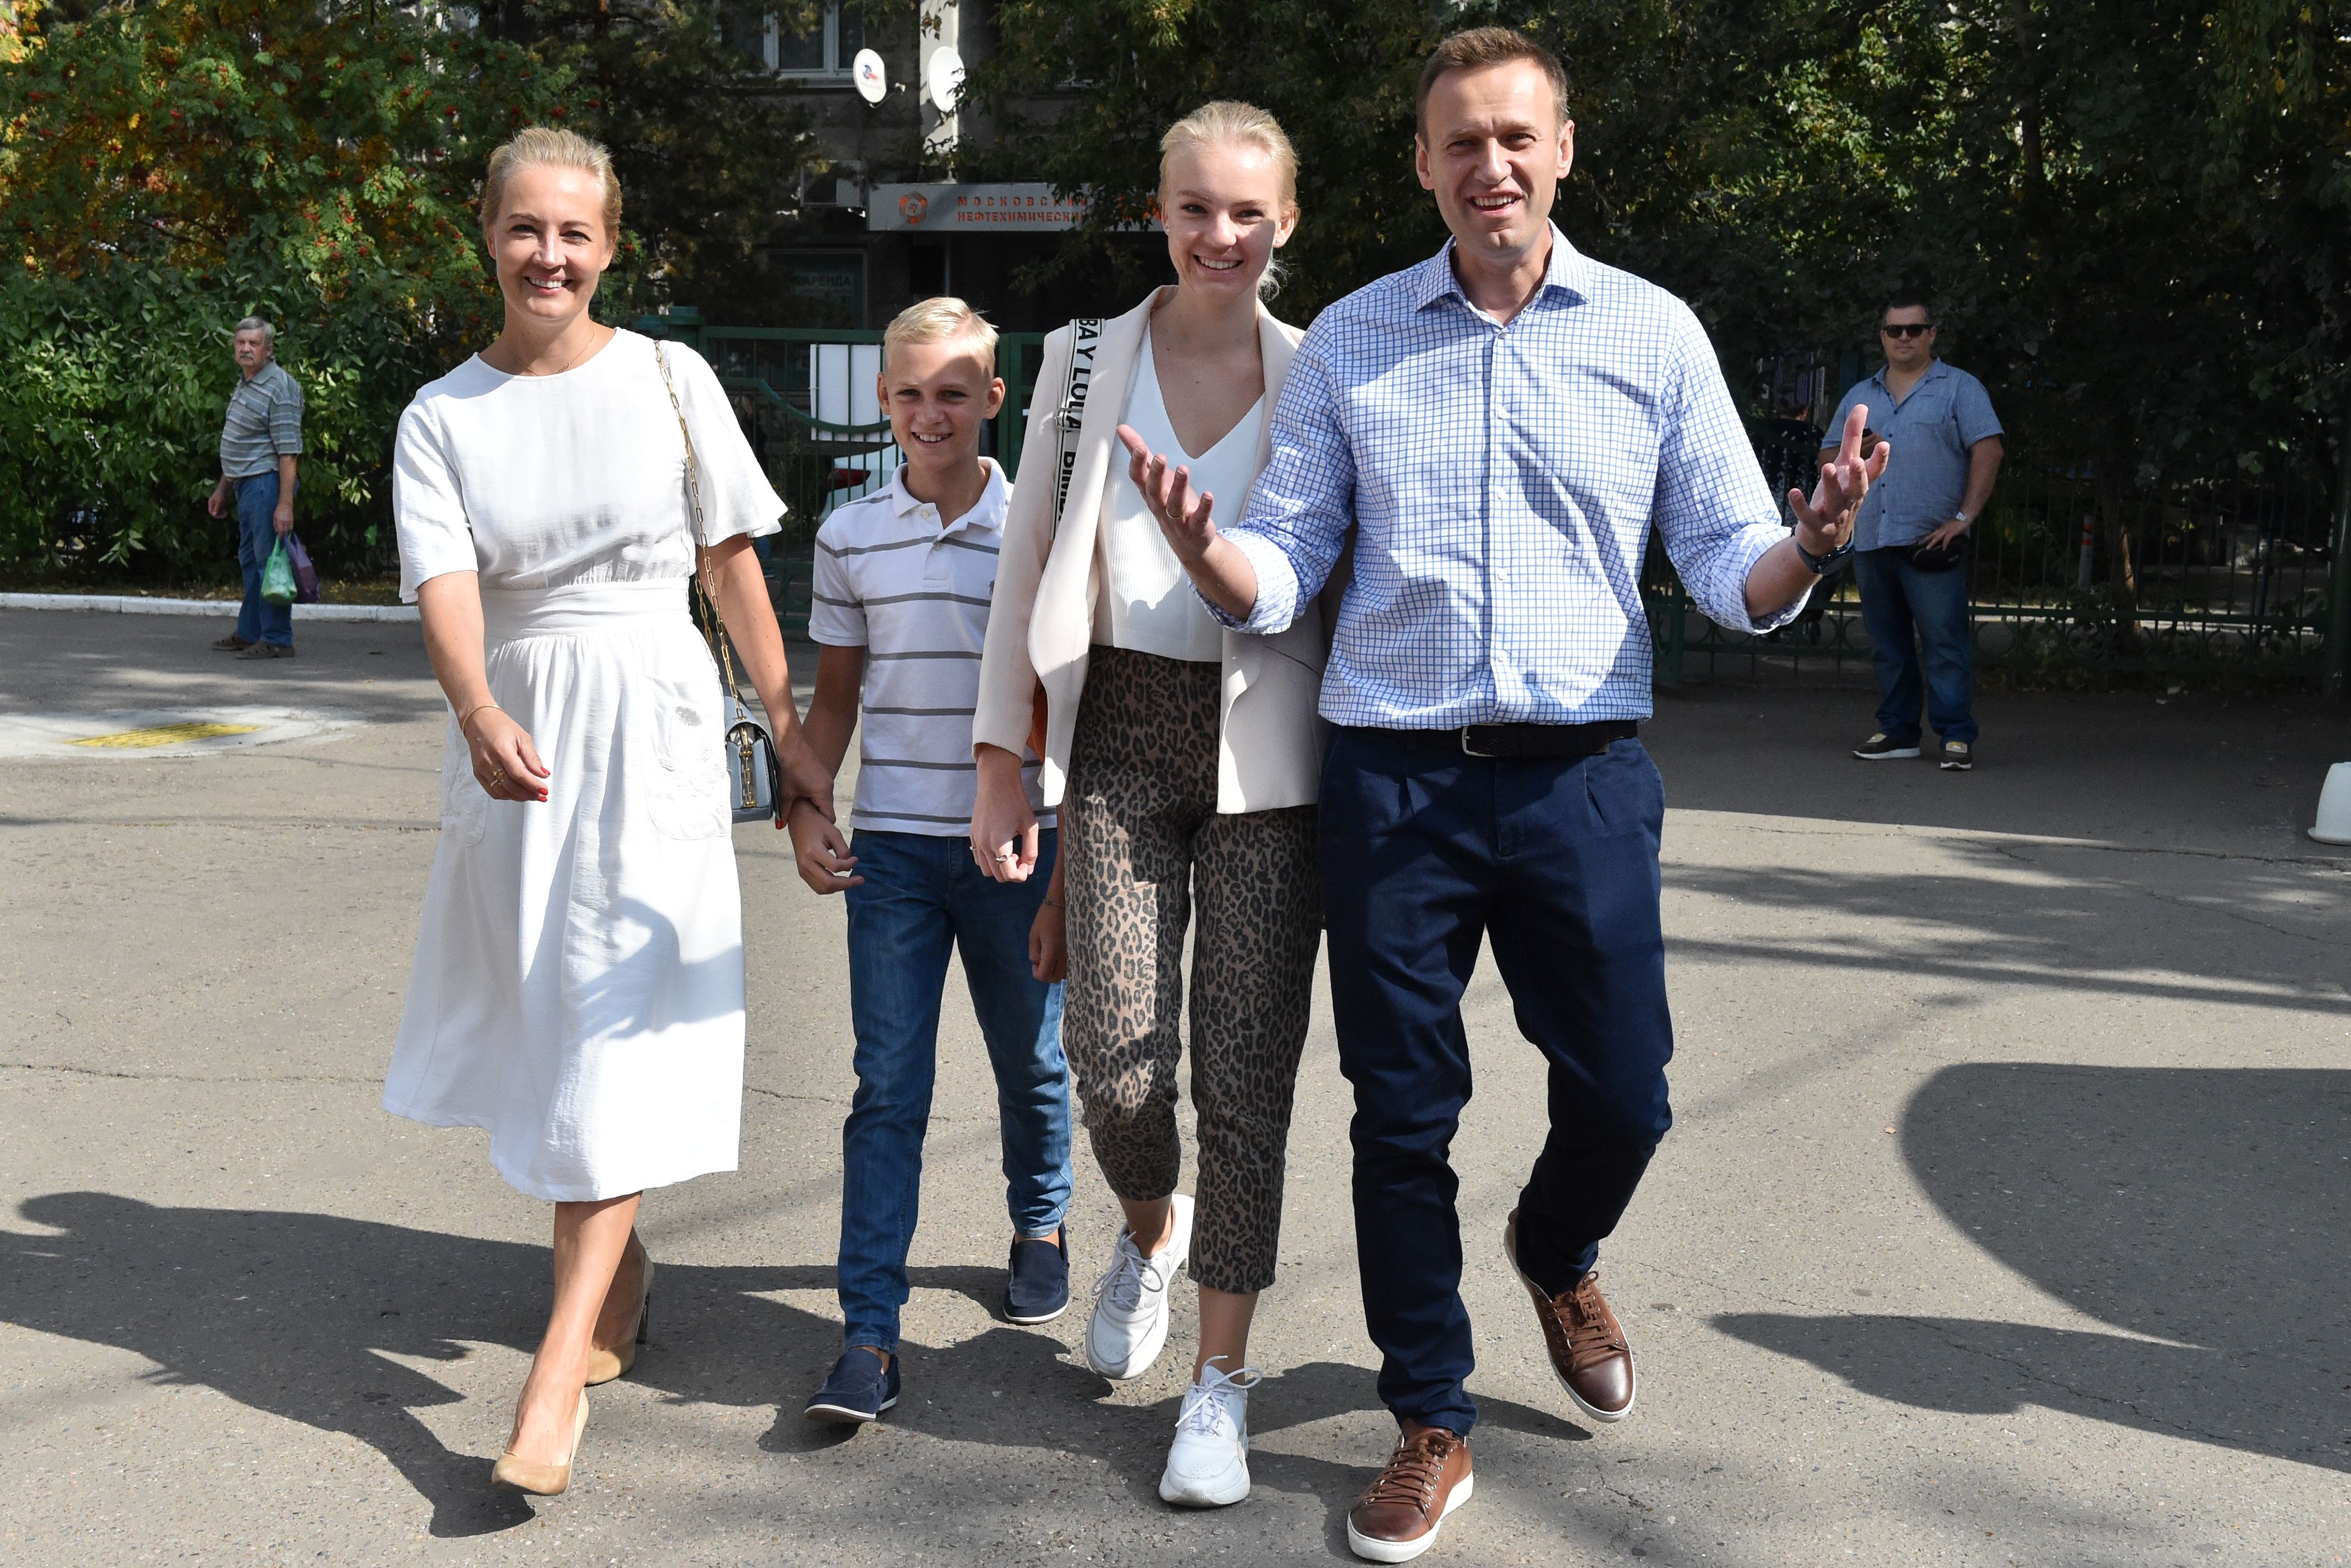 Russian opposition activist Alexei Navalny (R), his daughter Dasha (2R), son Zakhar (2L) and wife Yulia (L) arrive at a polling station during to the Moscow city Duma elections in Moscow on September 8, 2019.